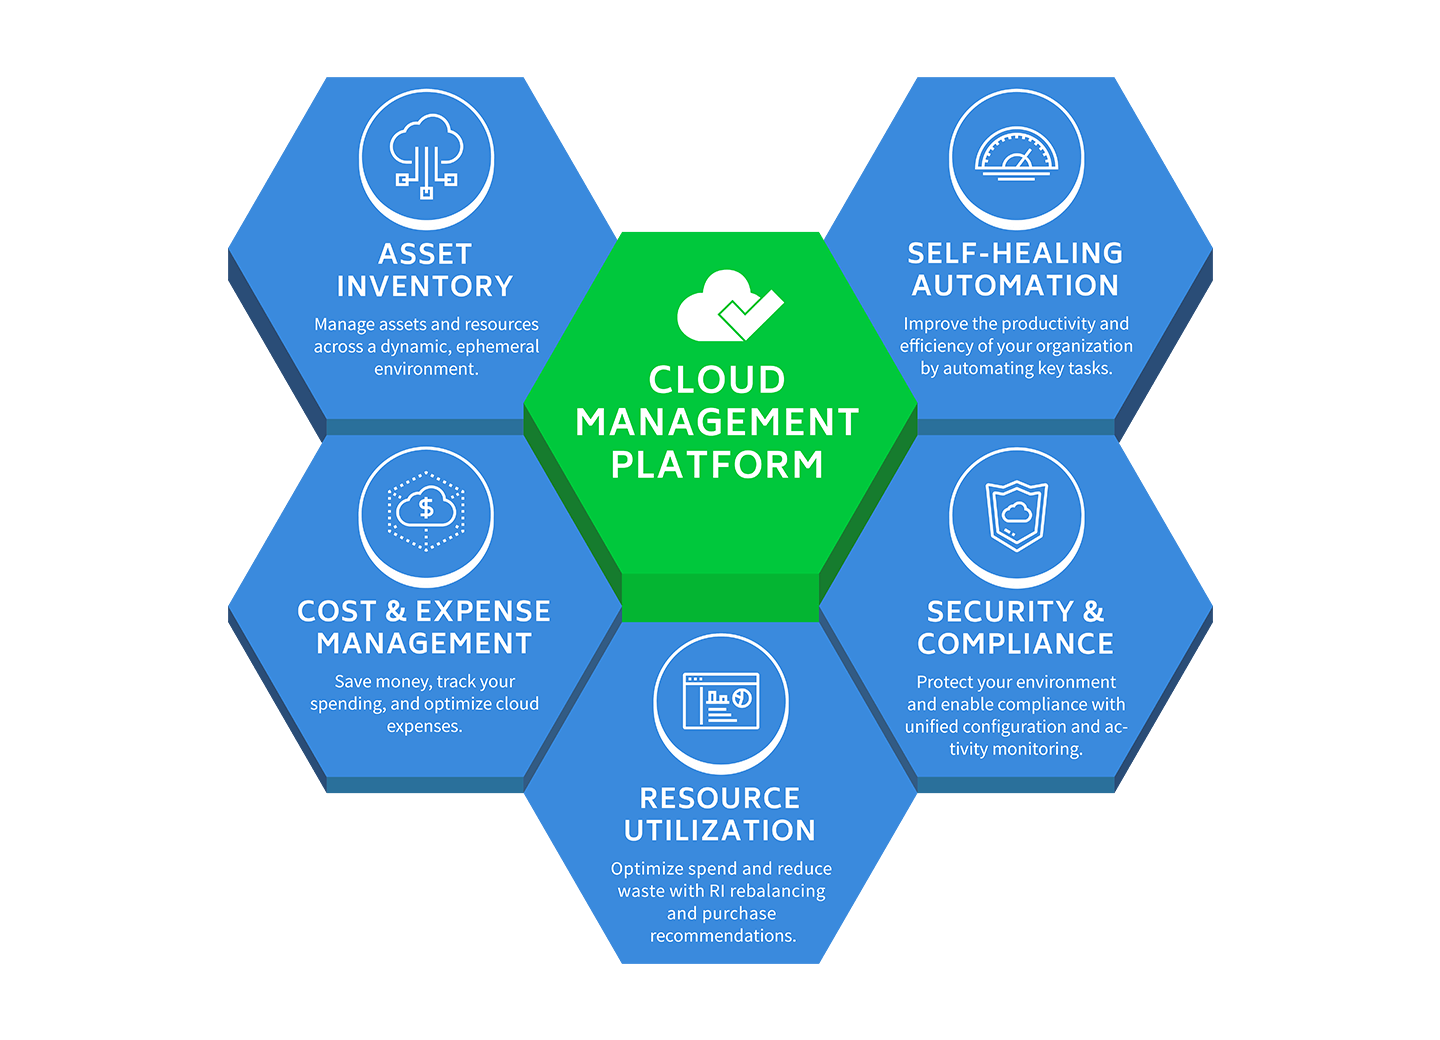 Graphic of CloudCheckr Product options in a honeycomb layout with Cloud Management Platform